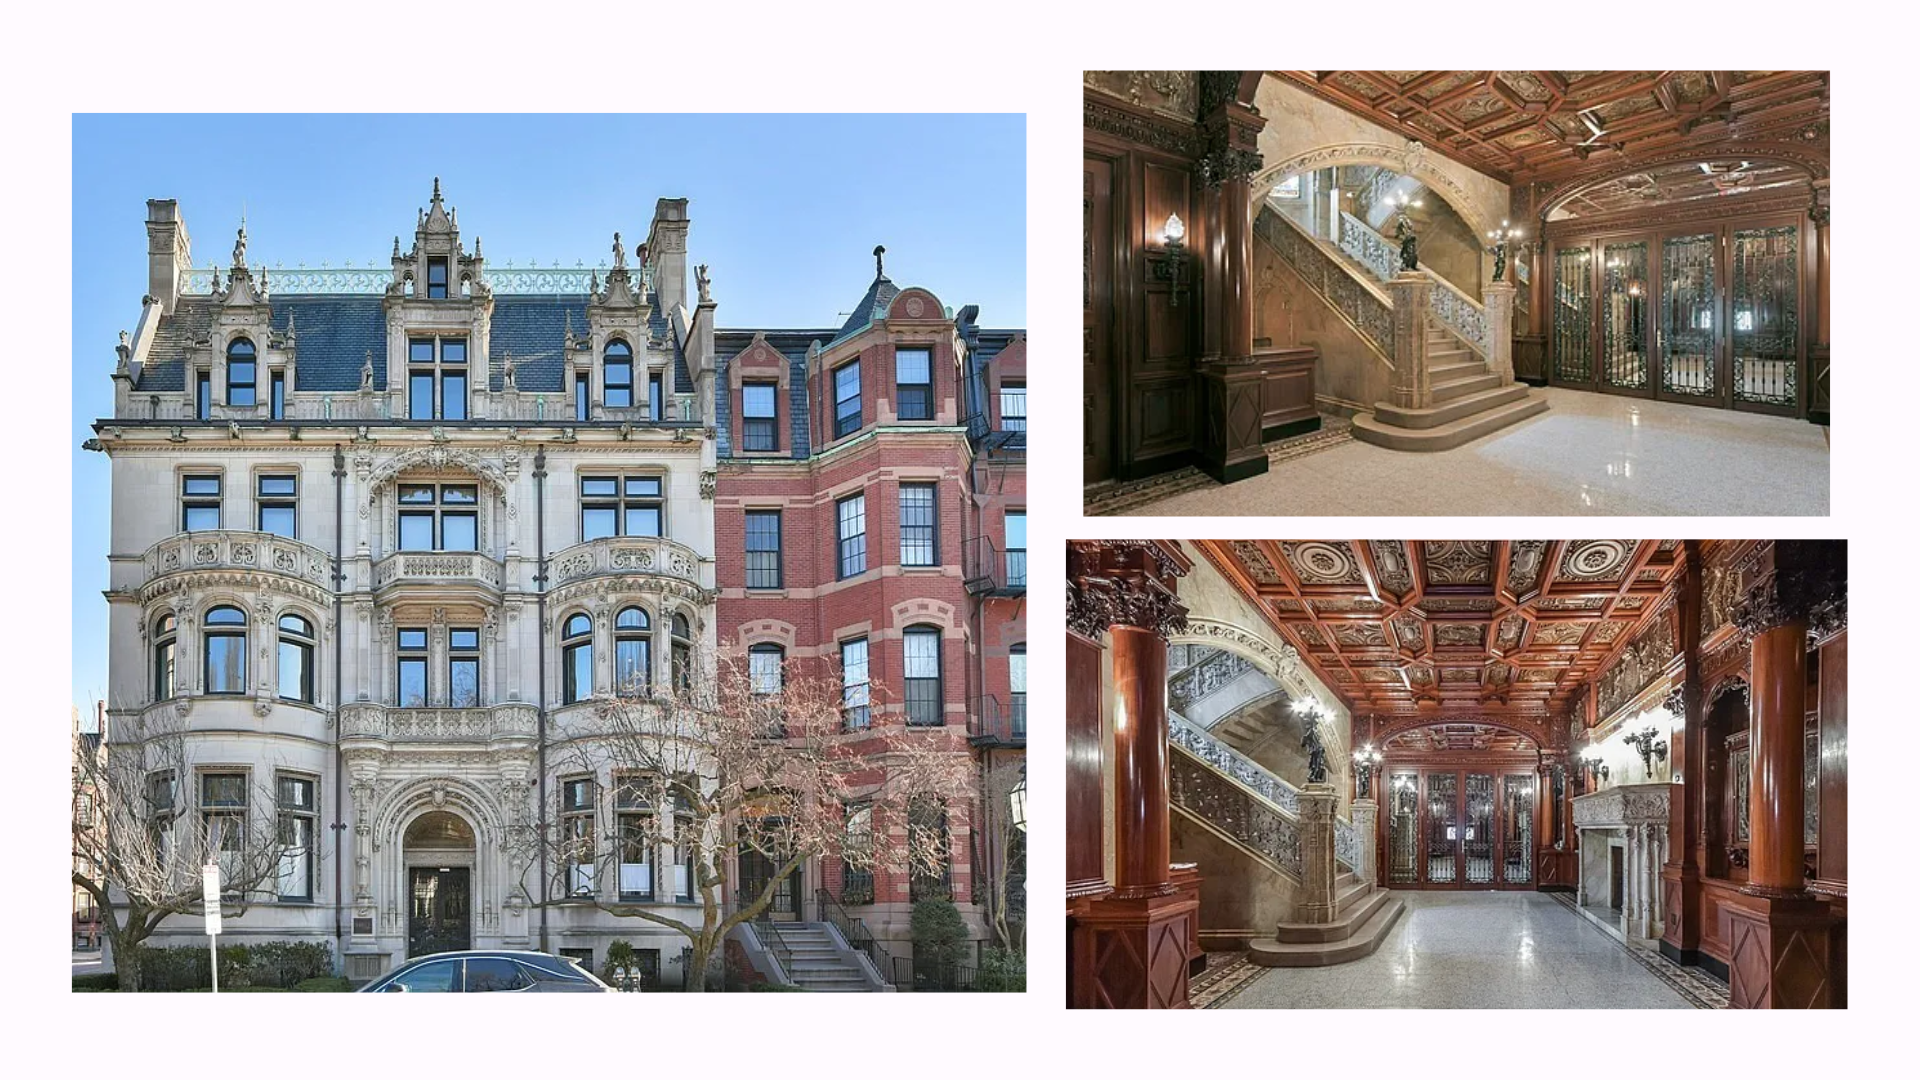 Three images, one of a white exterior of a Mansion, then two of the interior, showing stairs and interior wall details